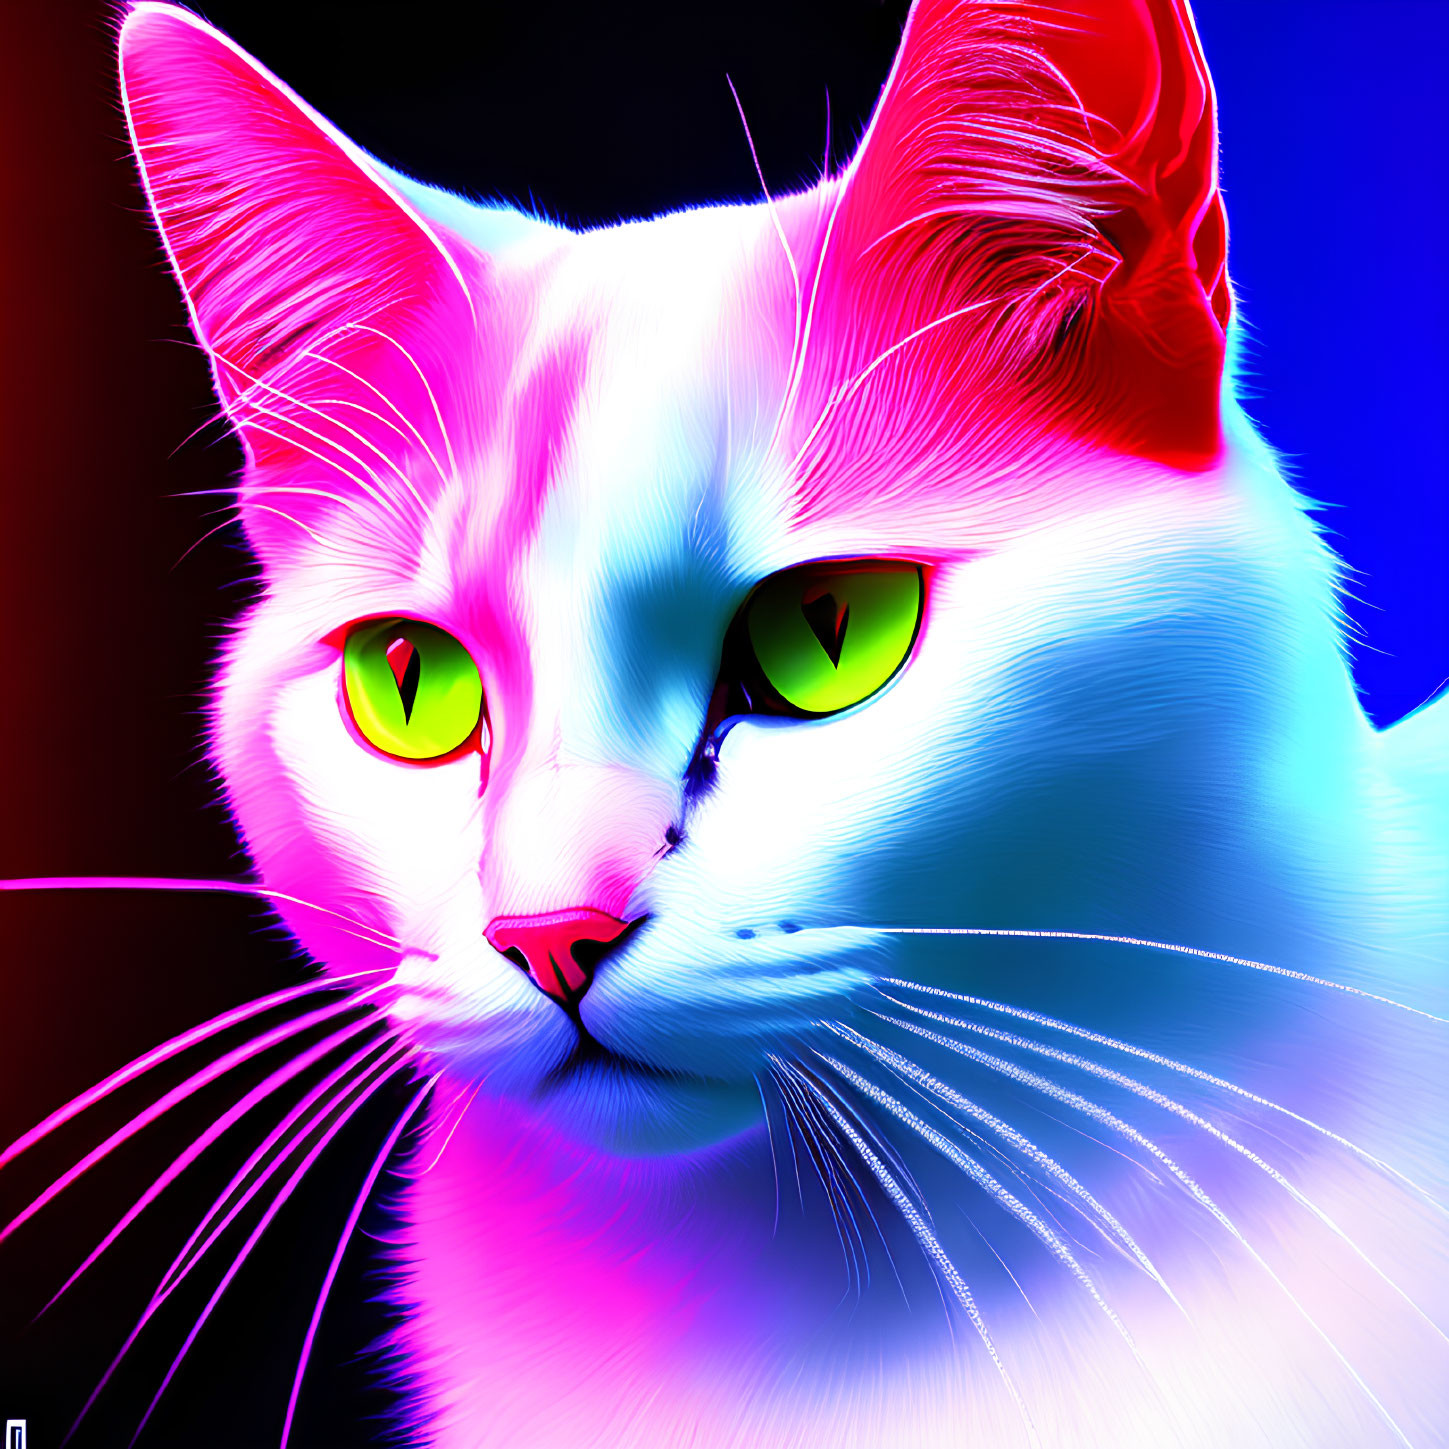 Colorful Digital Artwork of Cat with Neon Hues